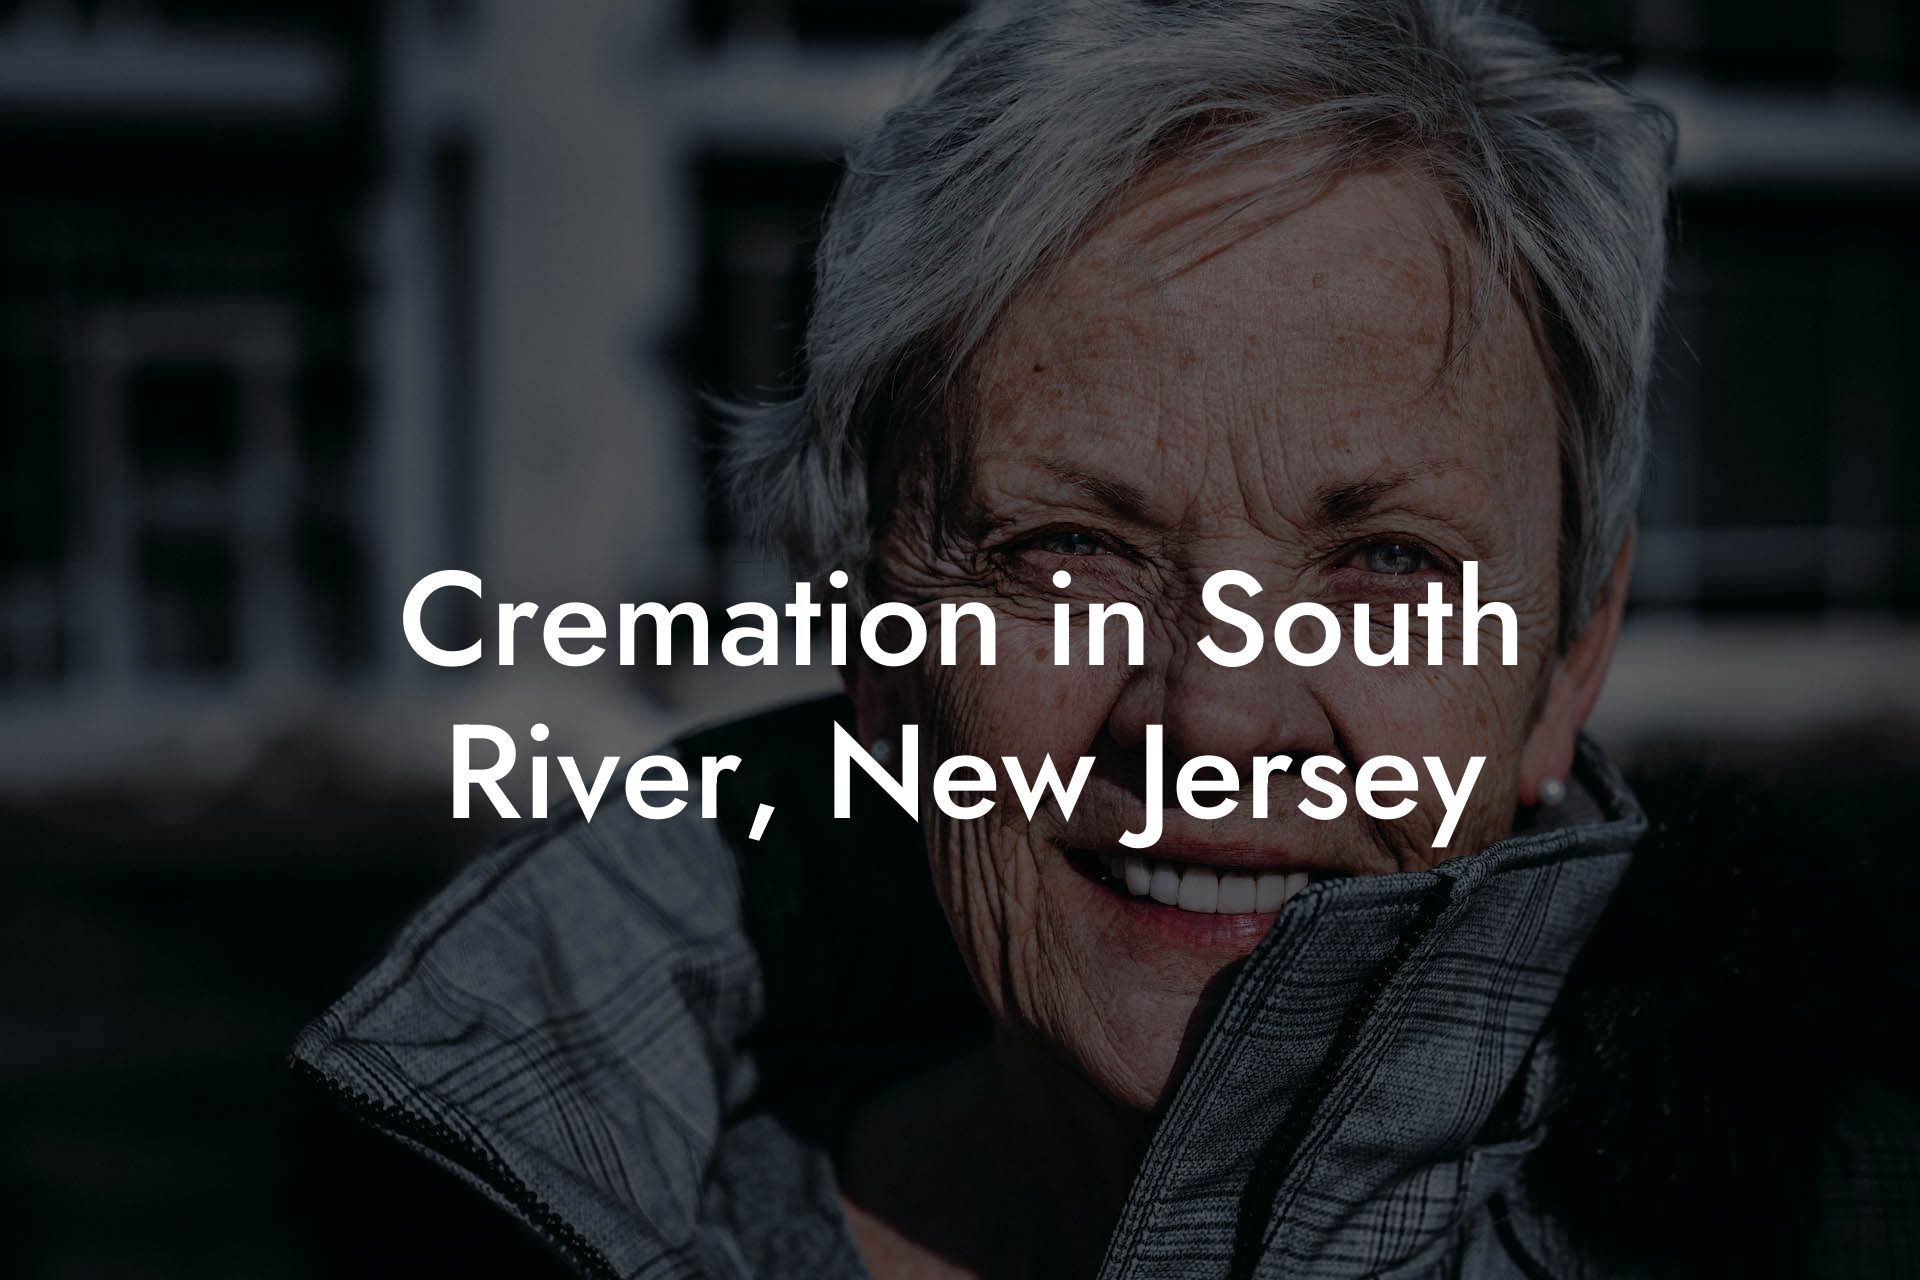 Cremation in South River, New Jersey